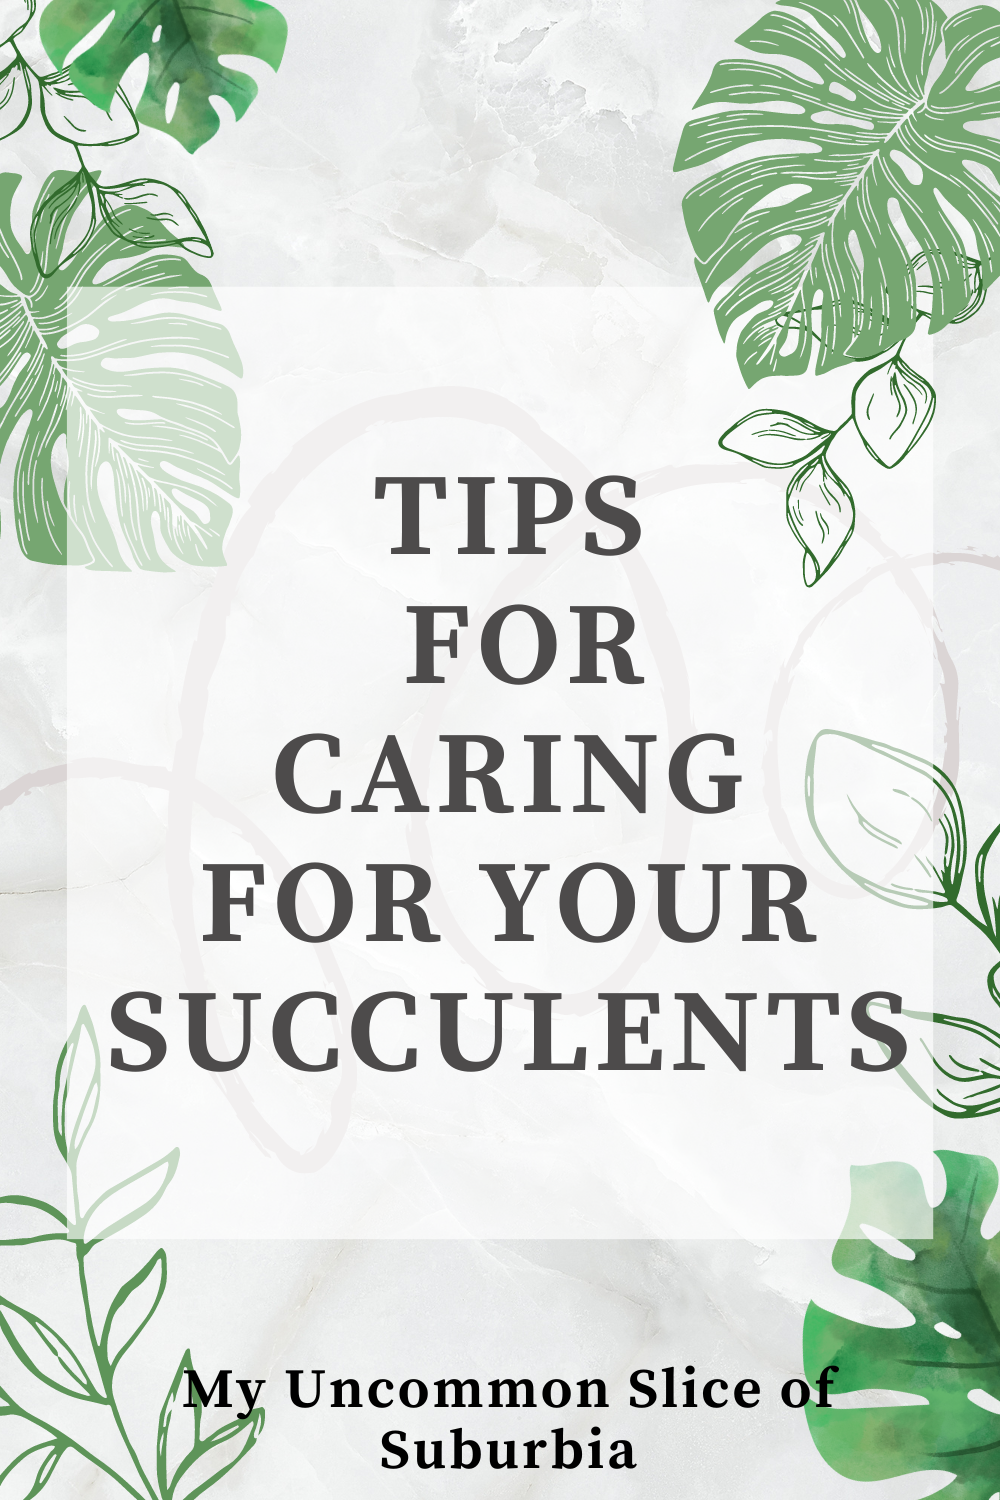 Tips for How to Care For Succulents